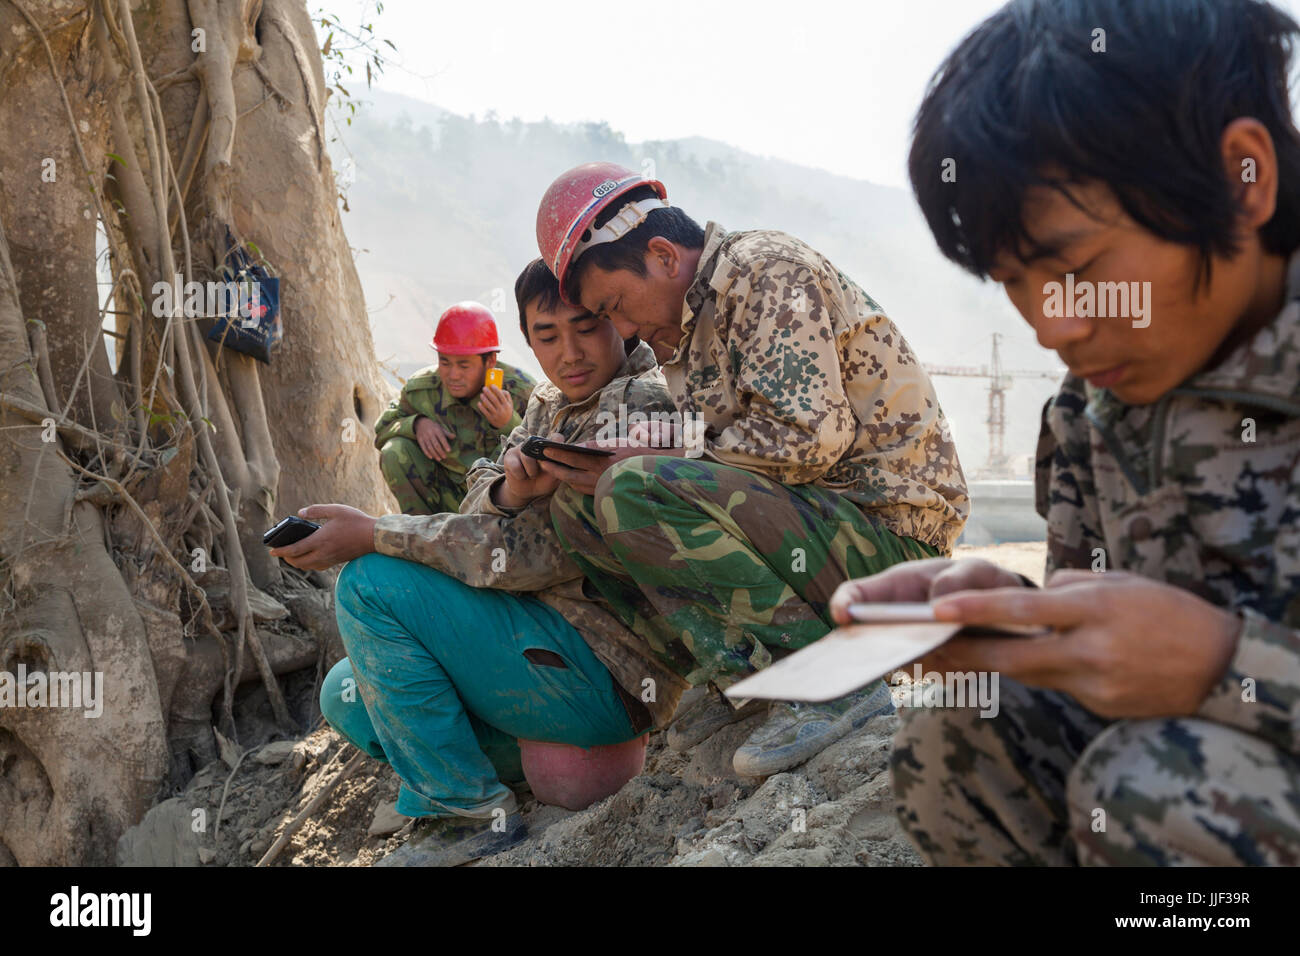 Chinese workers place calls and play video games on their smartphones at a safe distance from a planned dynamic blast at the construction site for Dam #5 on the Nam Ou River, Laos. Stock Photo